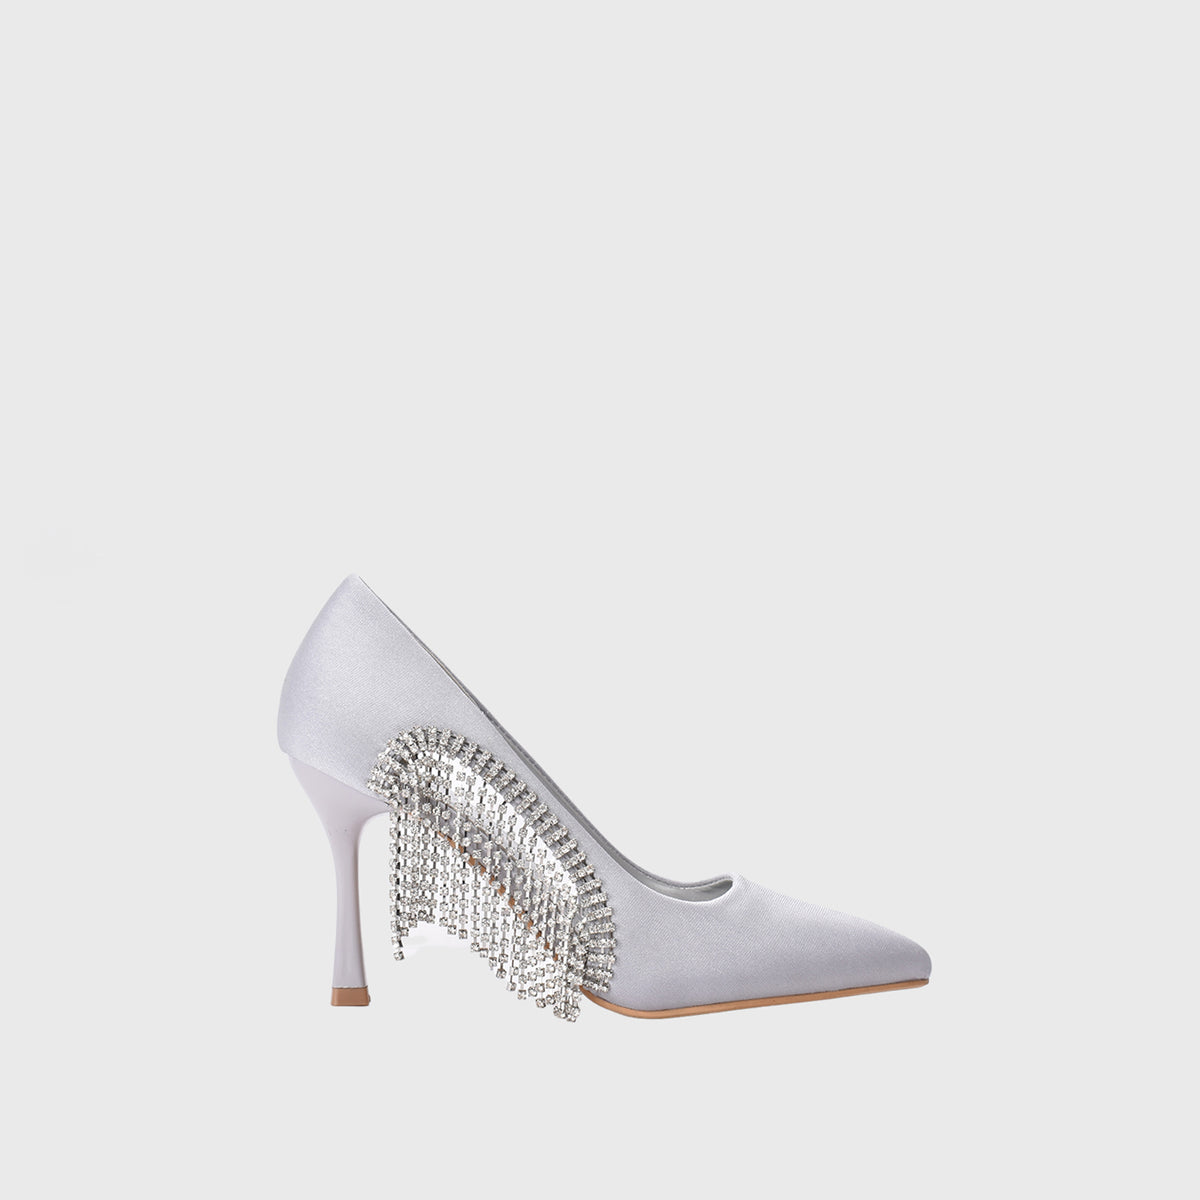 Silver High Heel Shoes With a Chain